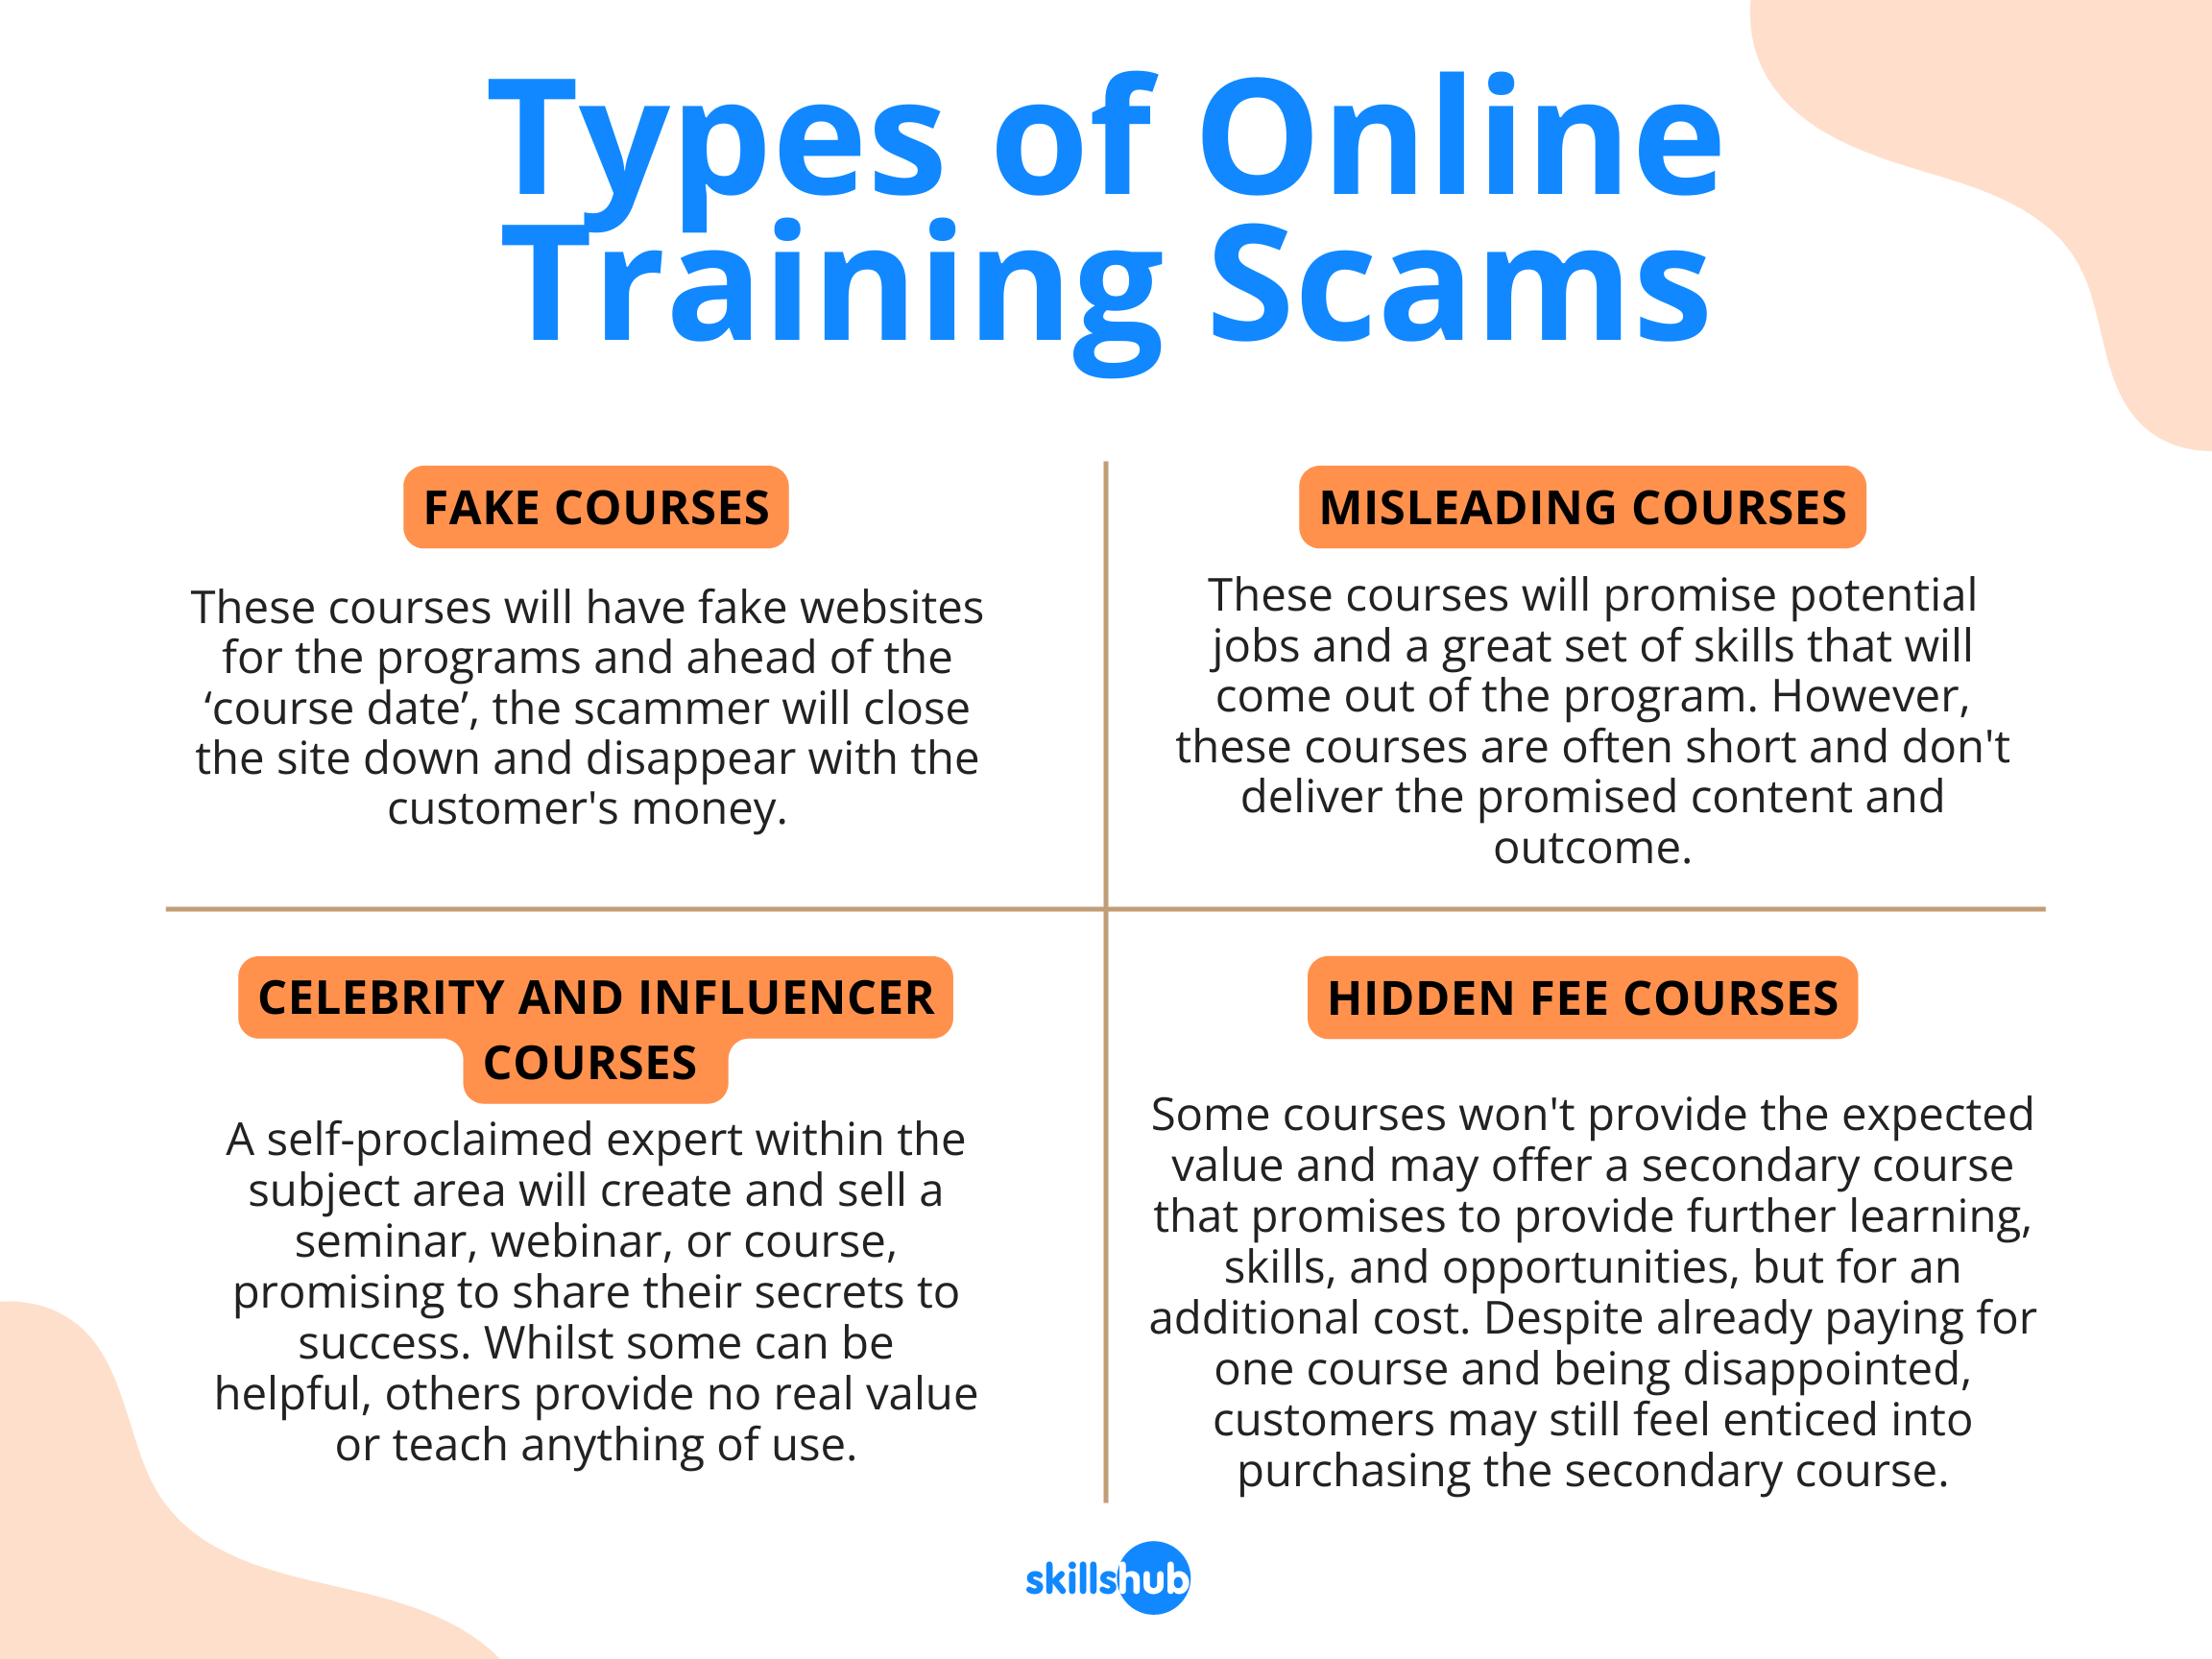 Types of Scam Courses